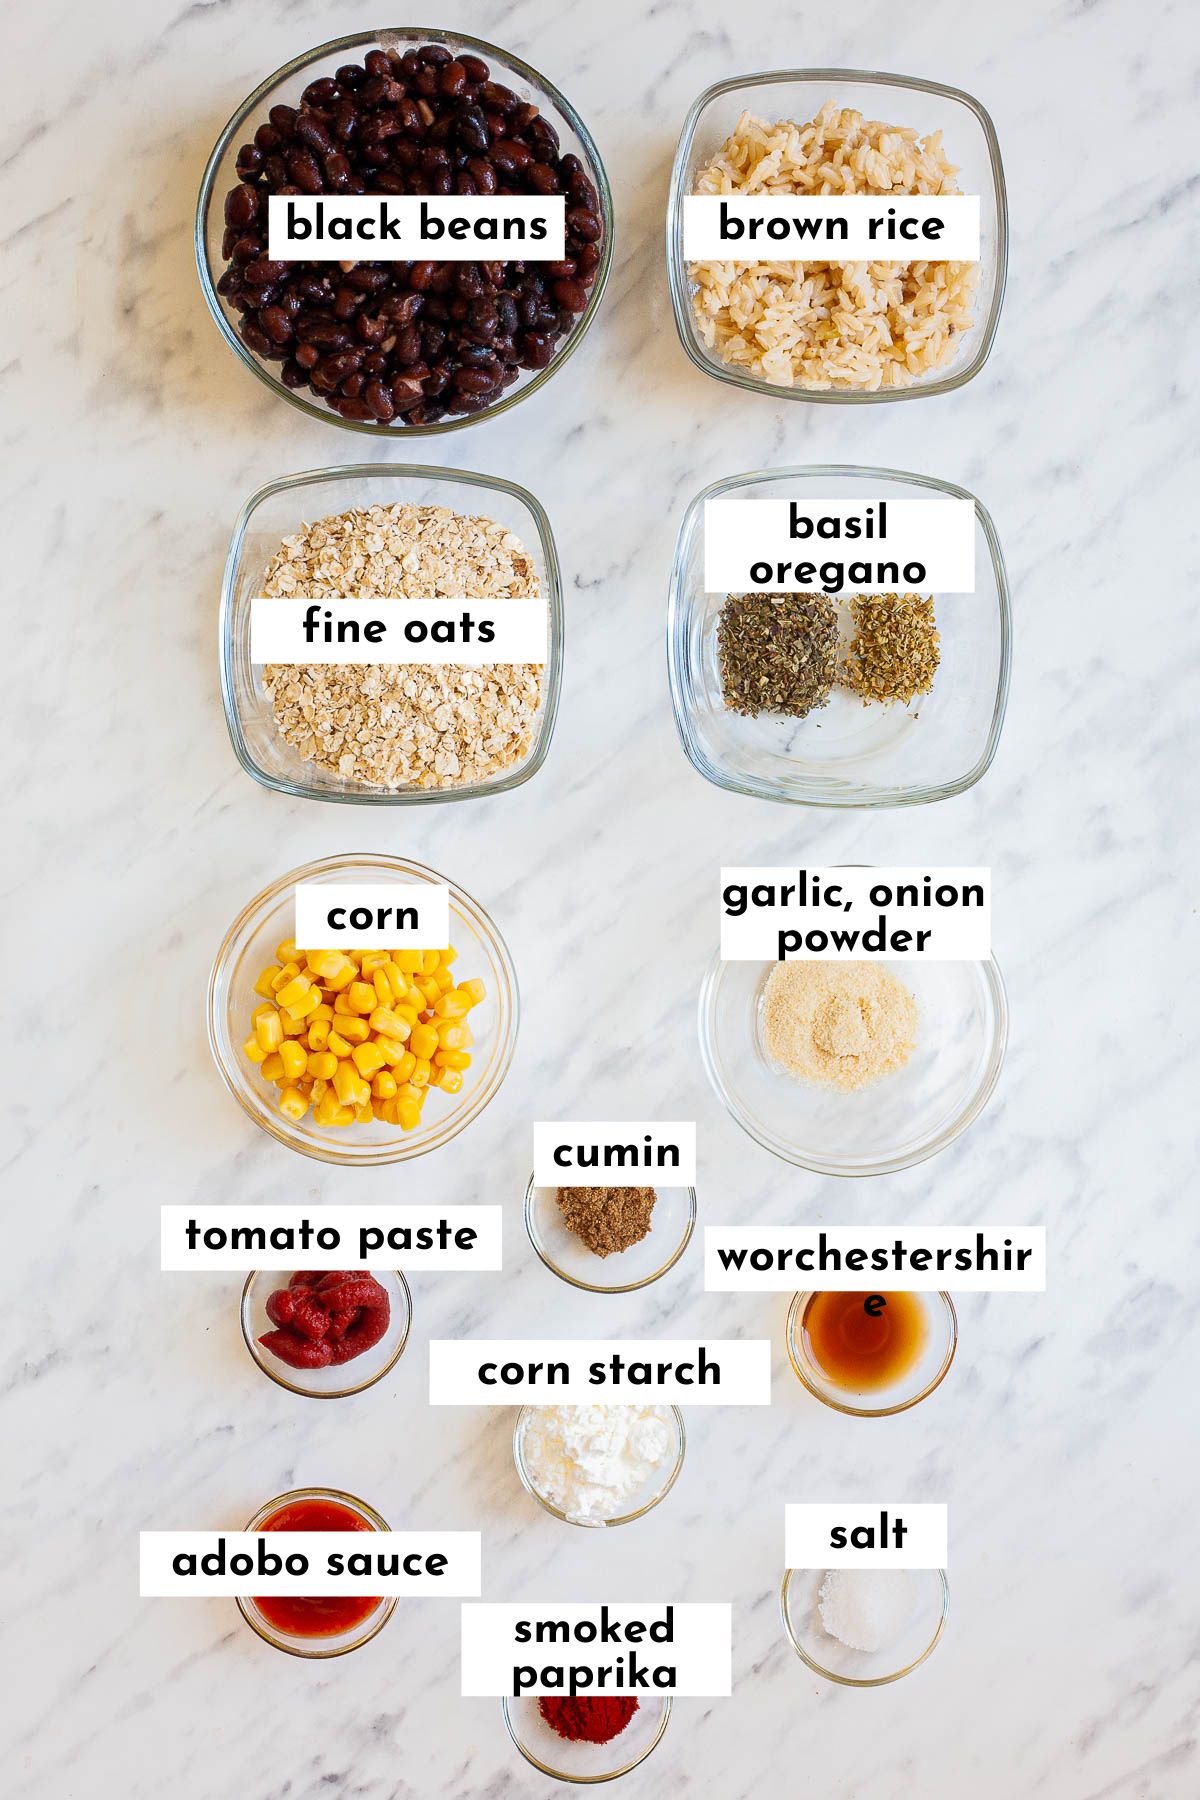 The ingredients of this black bean chipotle burger is displayed in small glass bowls: black bean, rice, oats, basil, oregano, corn, tomato paste and other spices